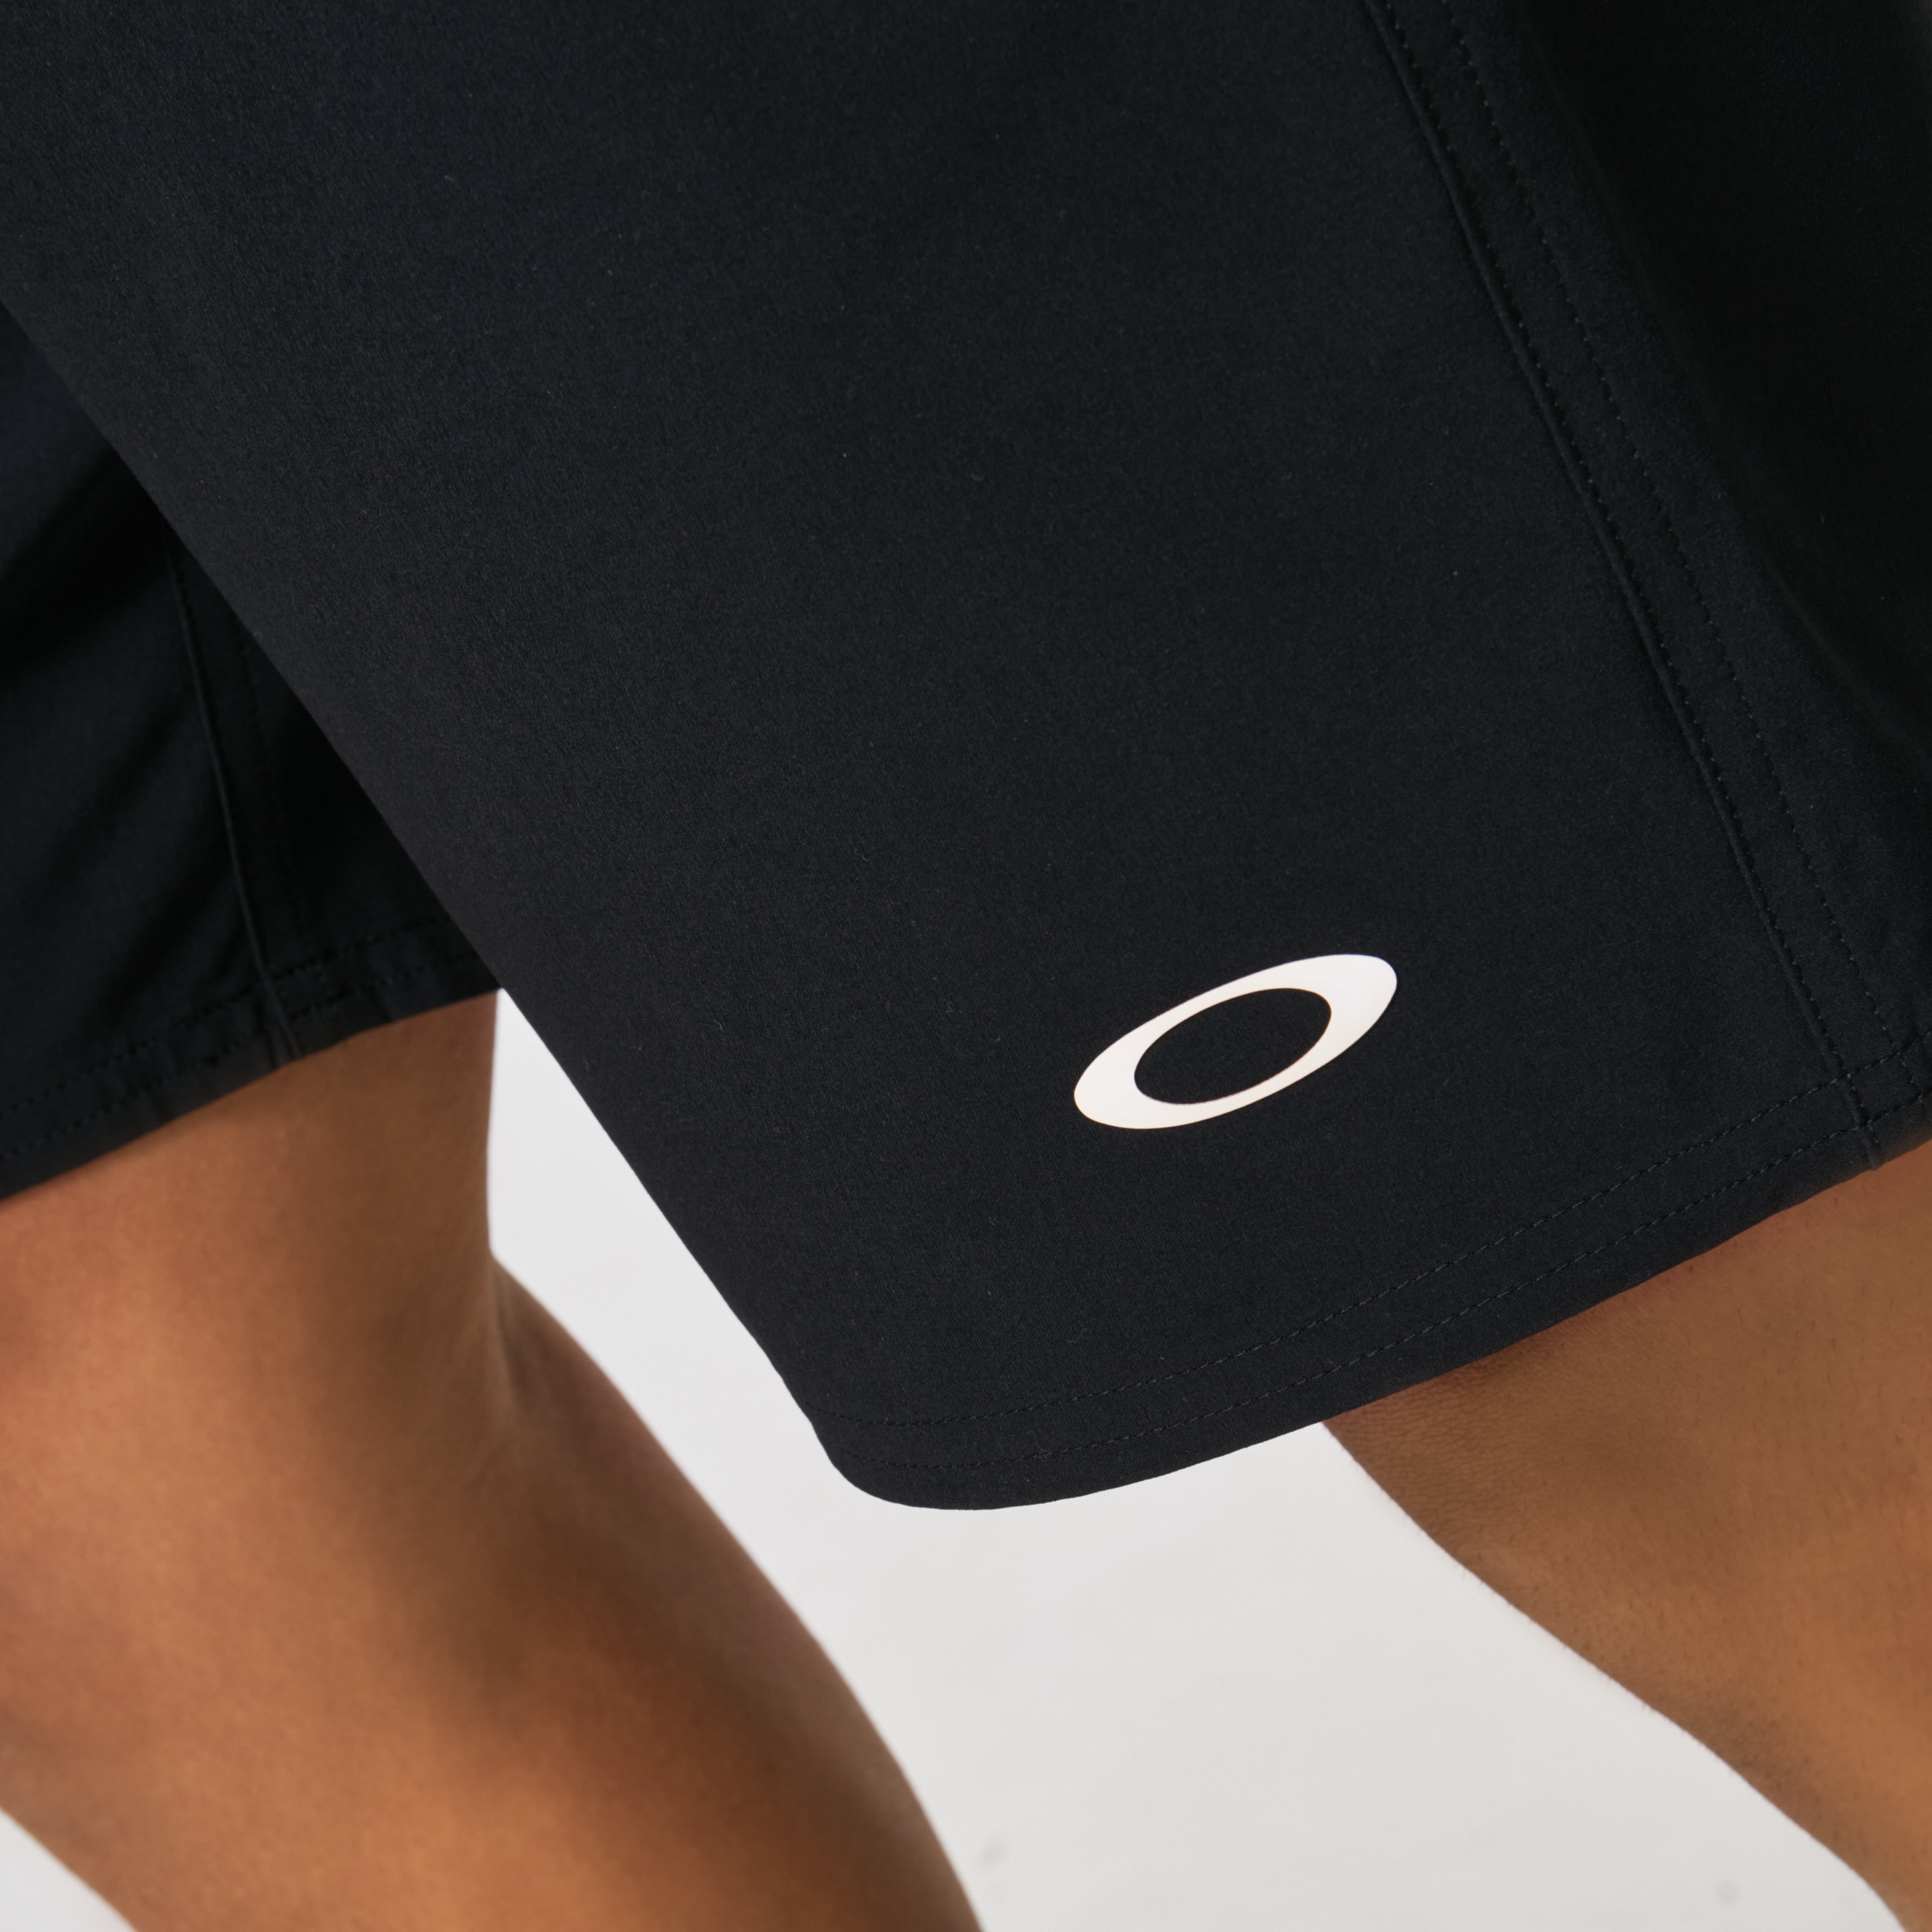 oakley ace volley 18 shorts